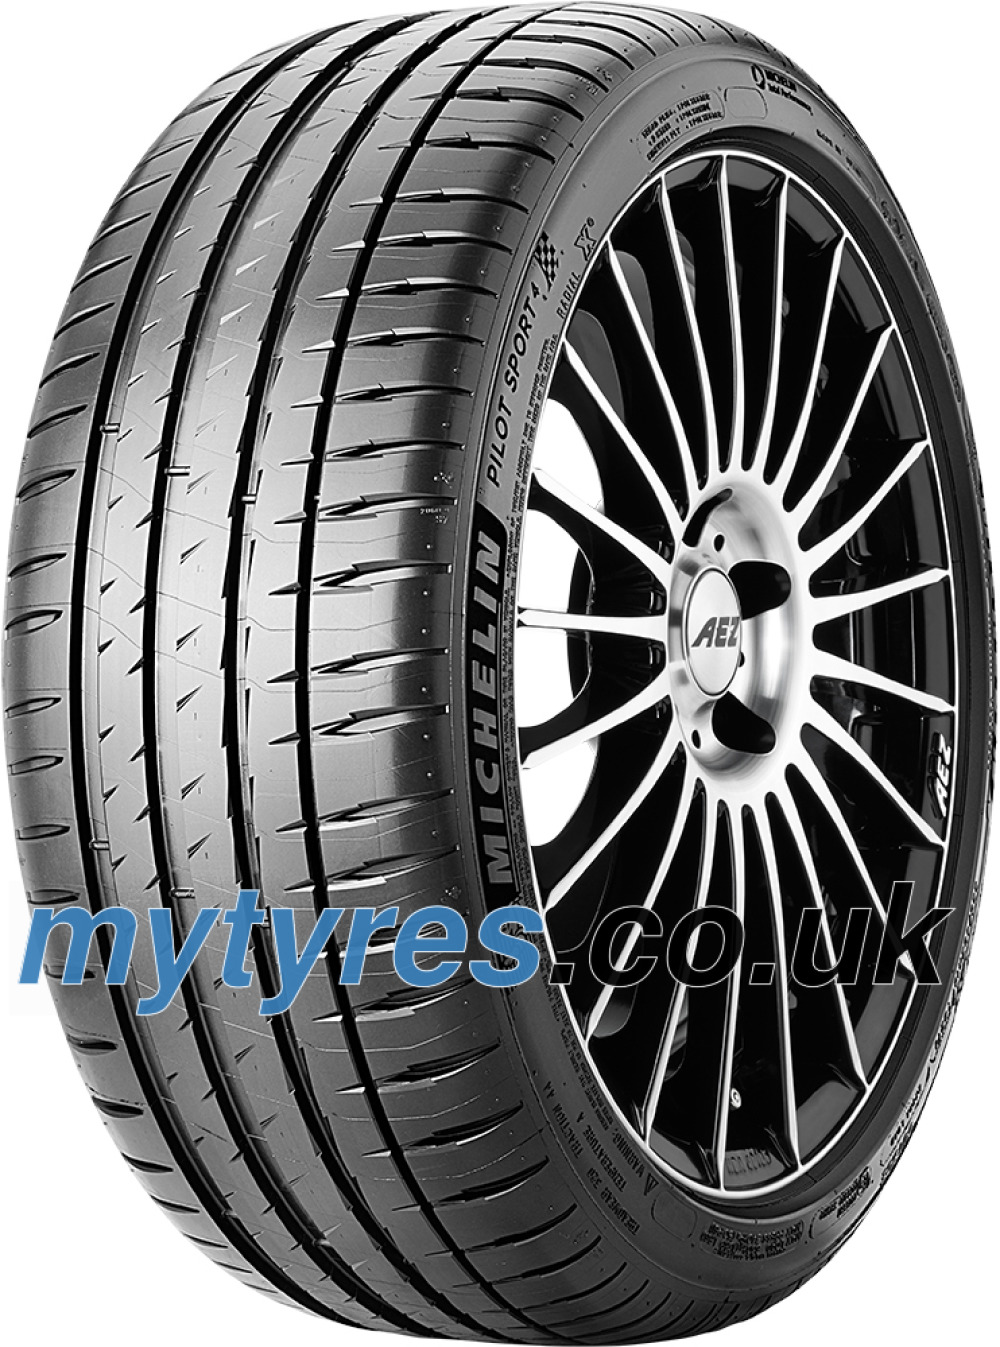 product image of Michelin Pilot Sport 4 ( 325/30 ZR21 (108Y) XL Acoustic, N0 )